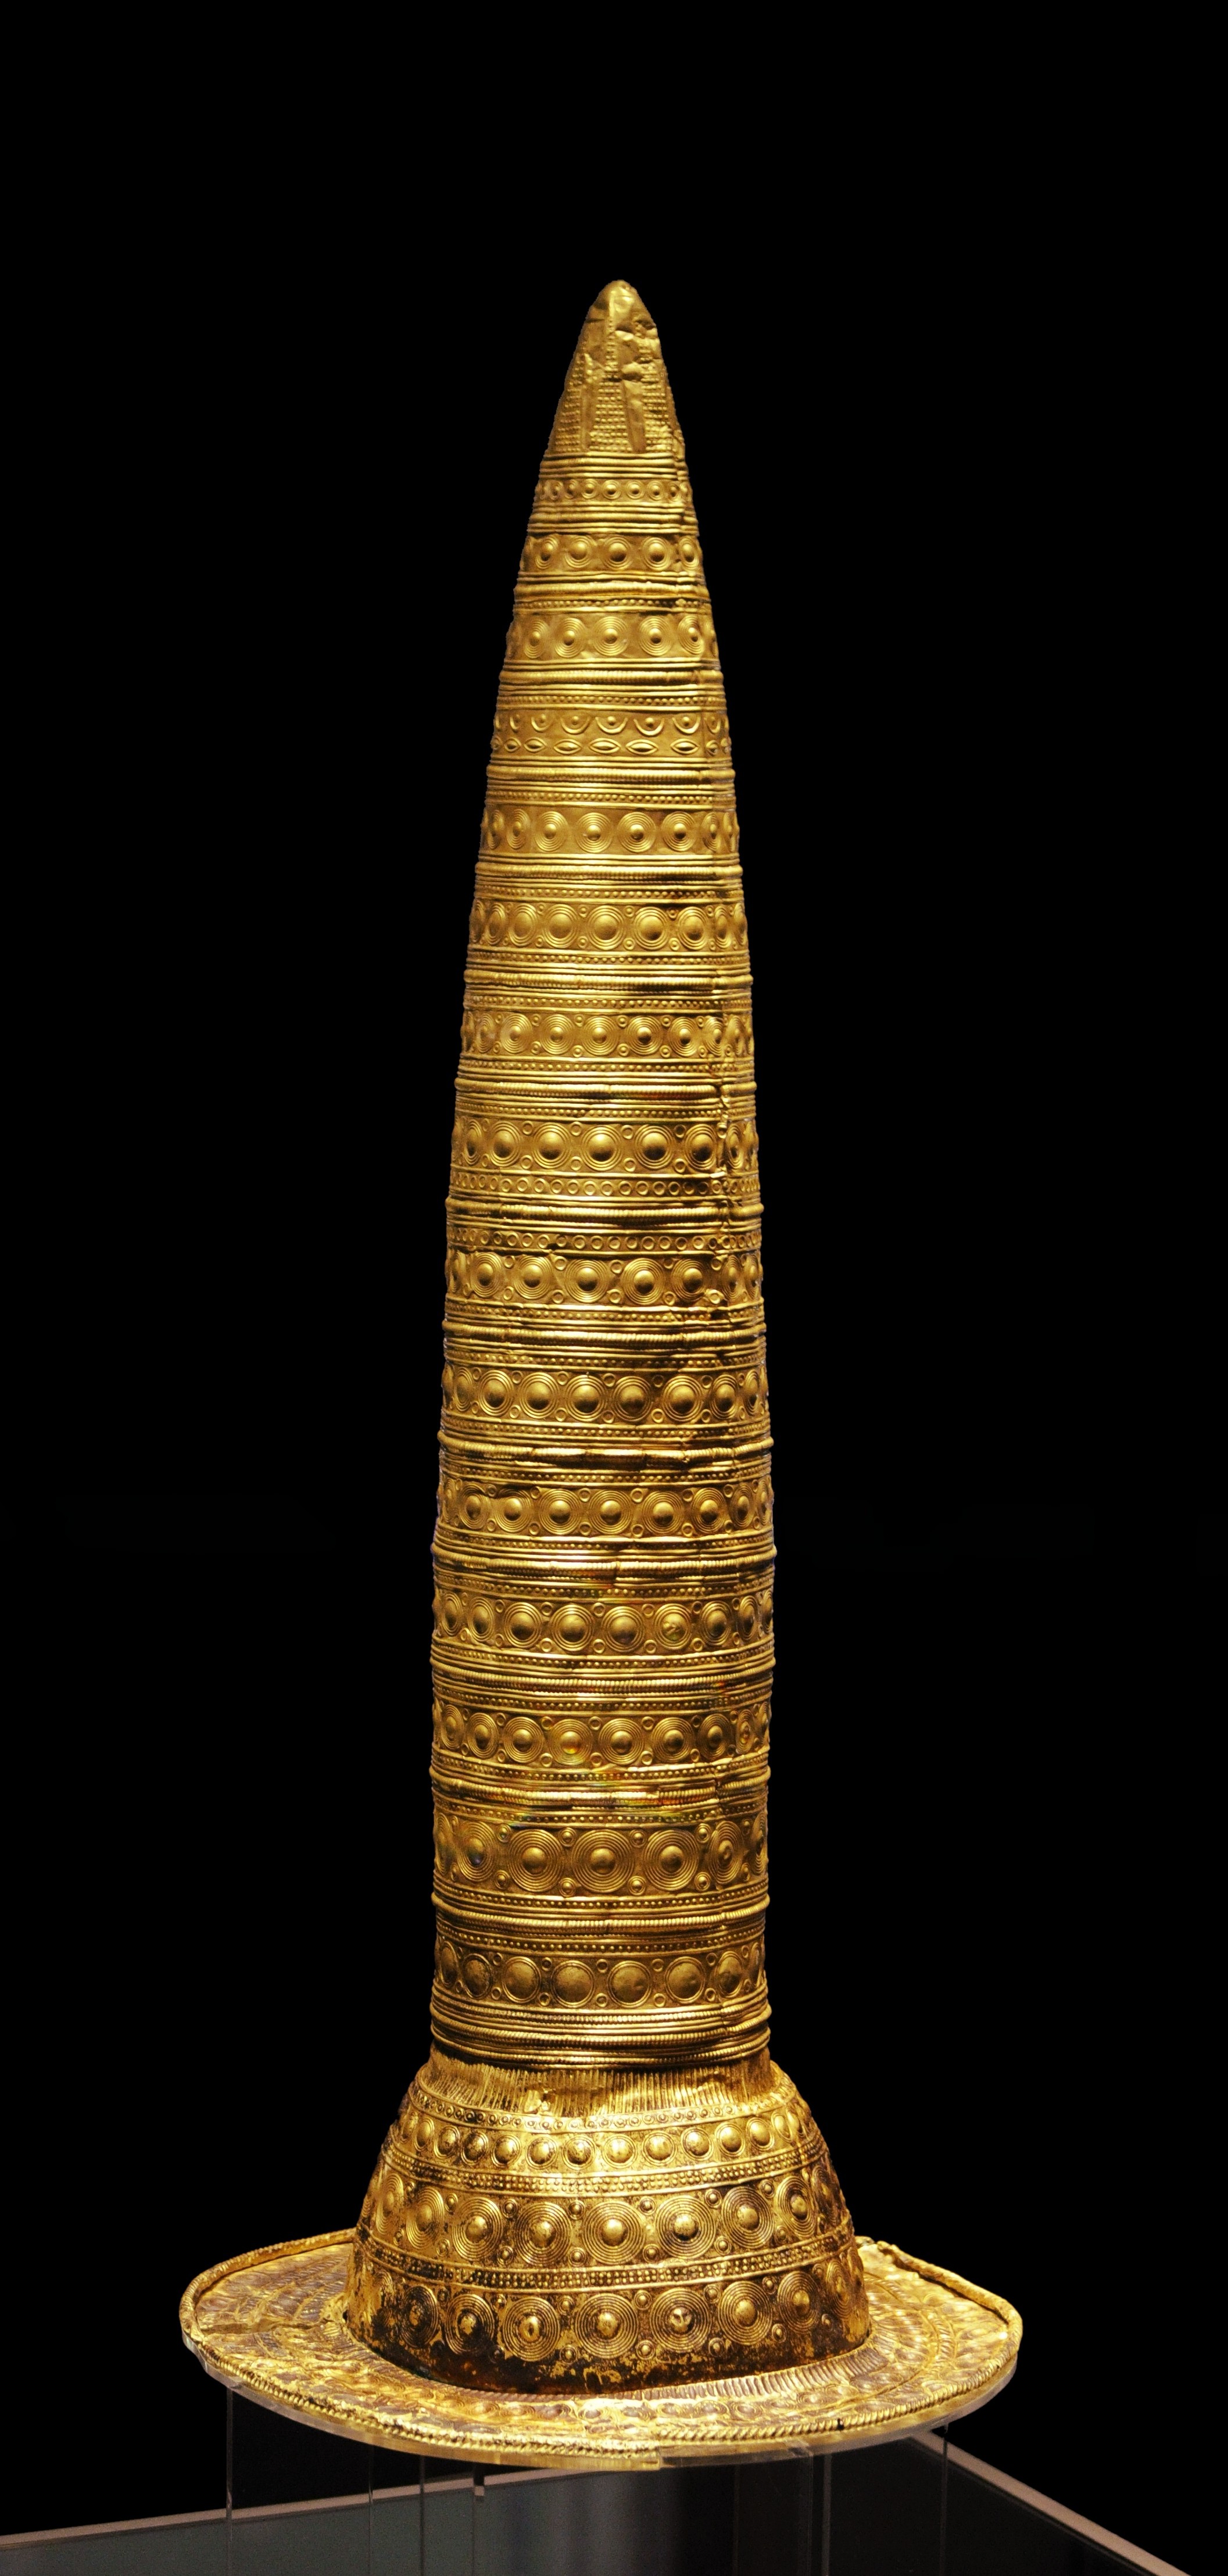 Berlin Gold Hat - 490 grams of gold, overall height 745 mm, average thickness 0.6 mm. Made in the Late Bronze Age, circa 1,000 to 800 BC